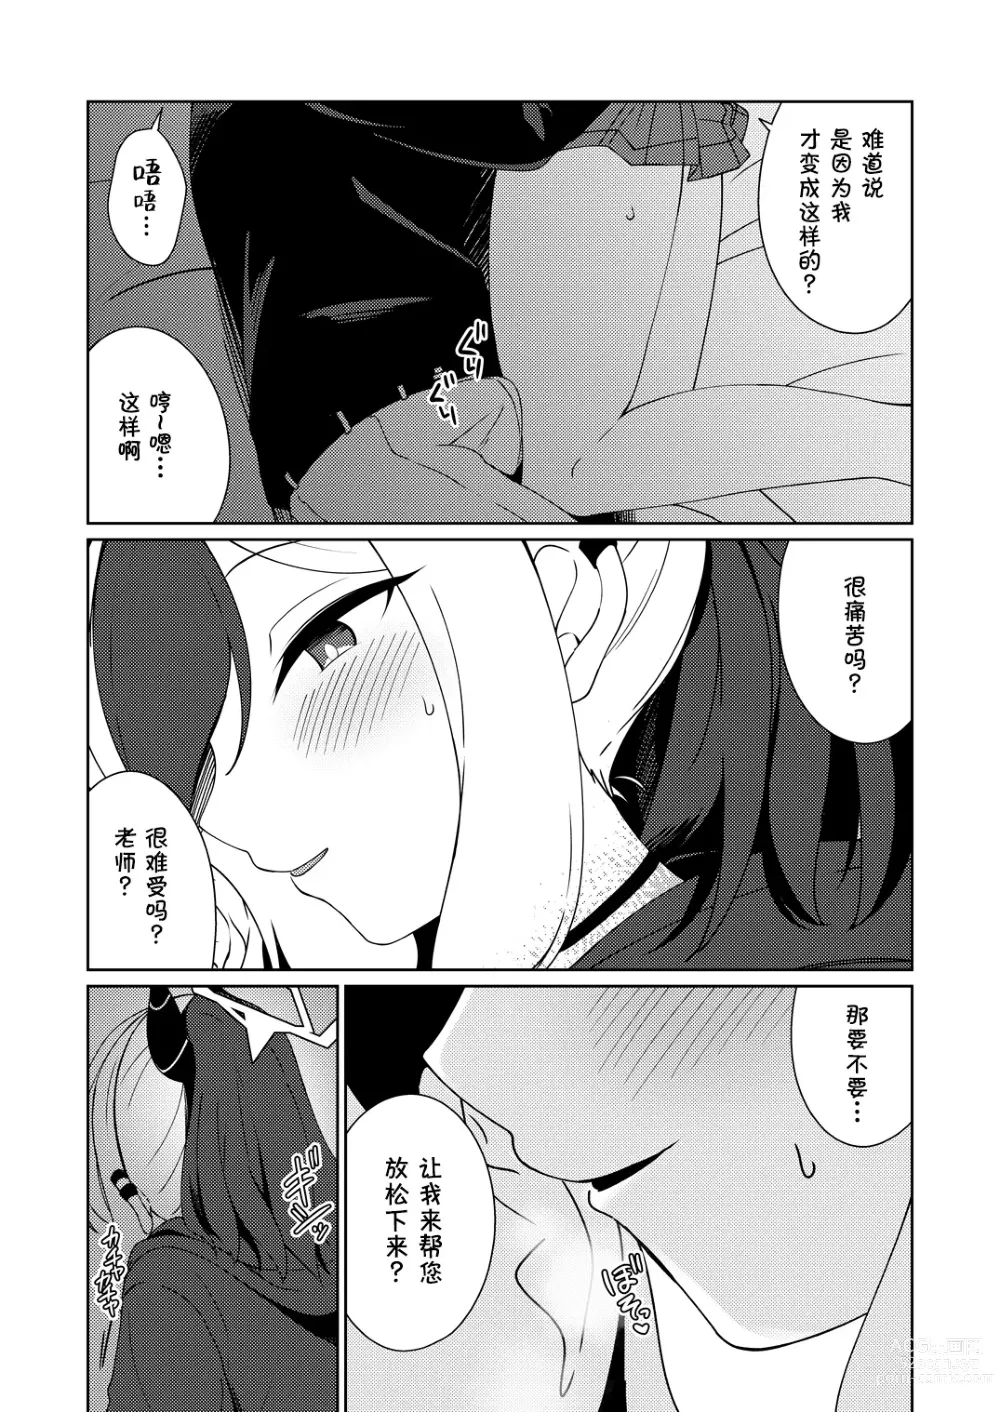 Page 9 of doujinshi 雨夜に蕩ける心拍音